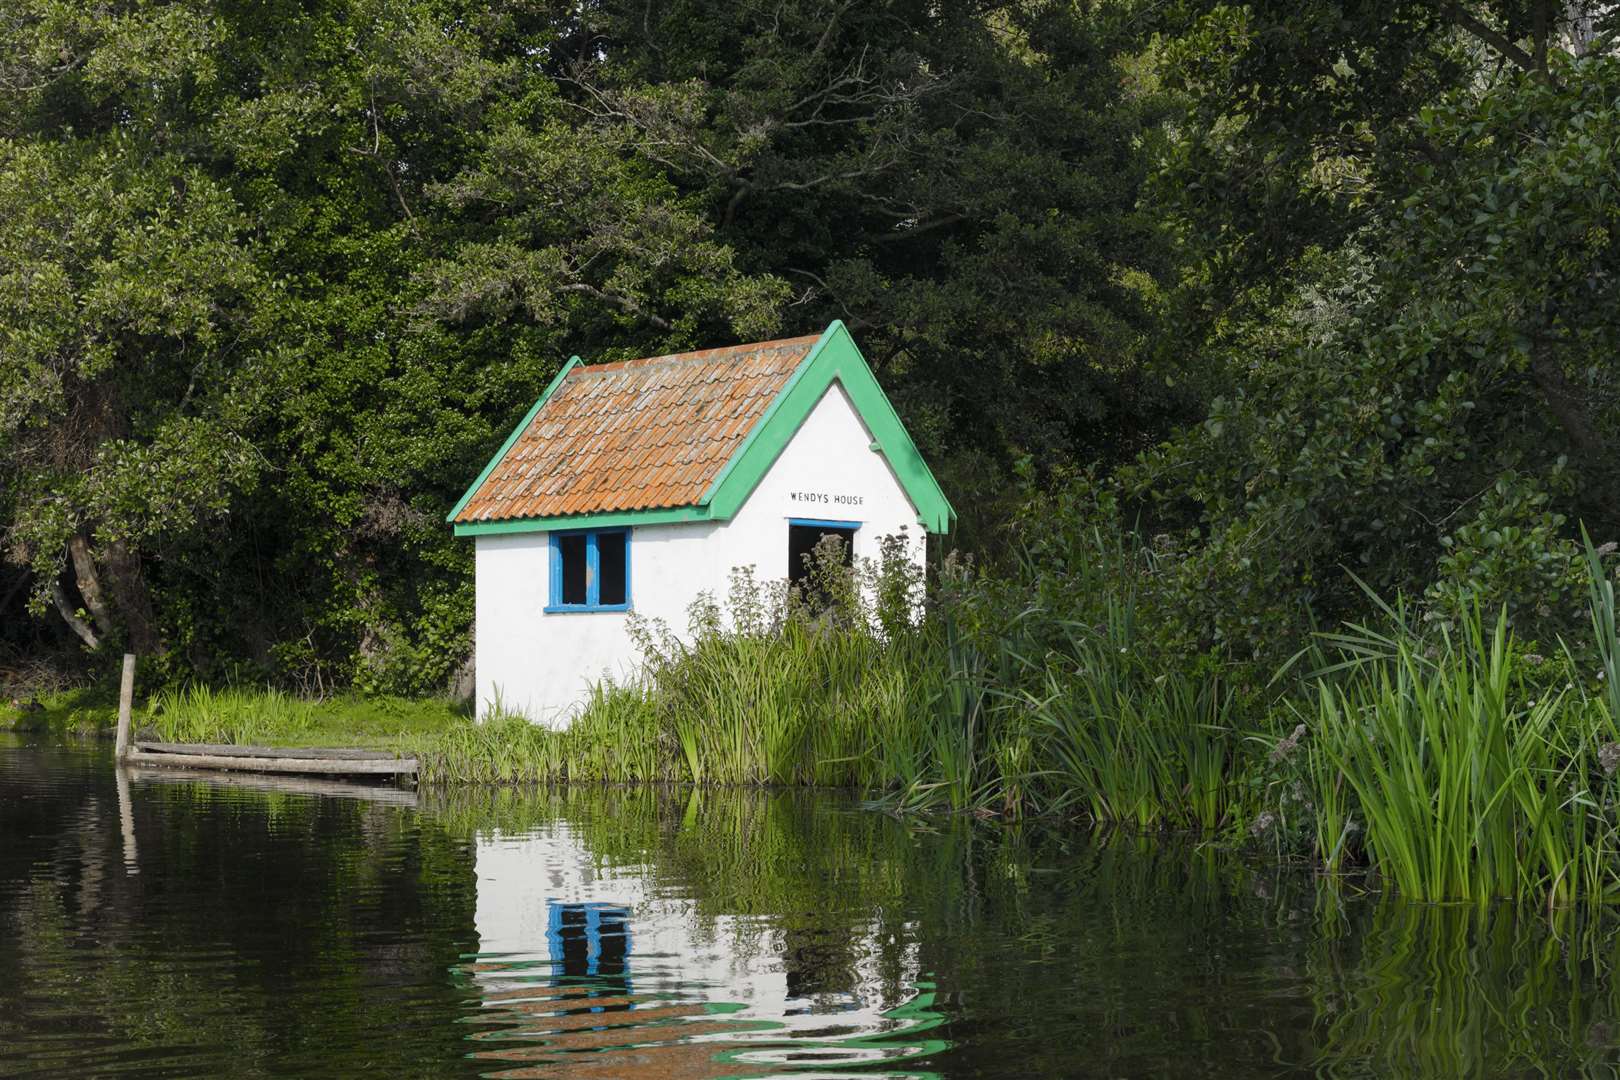 The Peter Pan-inspired Wendy’s House at Thorpeness Meare in Suffolk (Historic England Archive/PA)